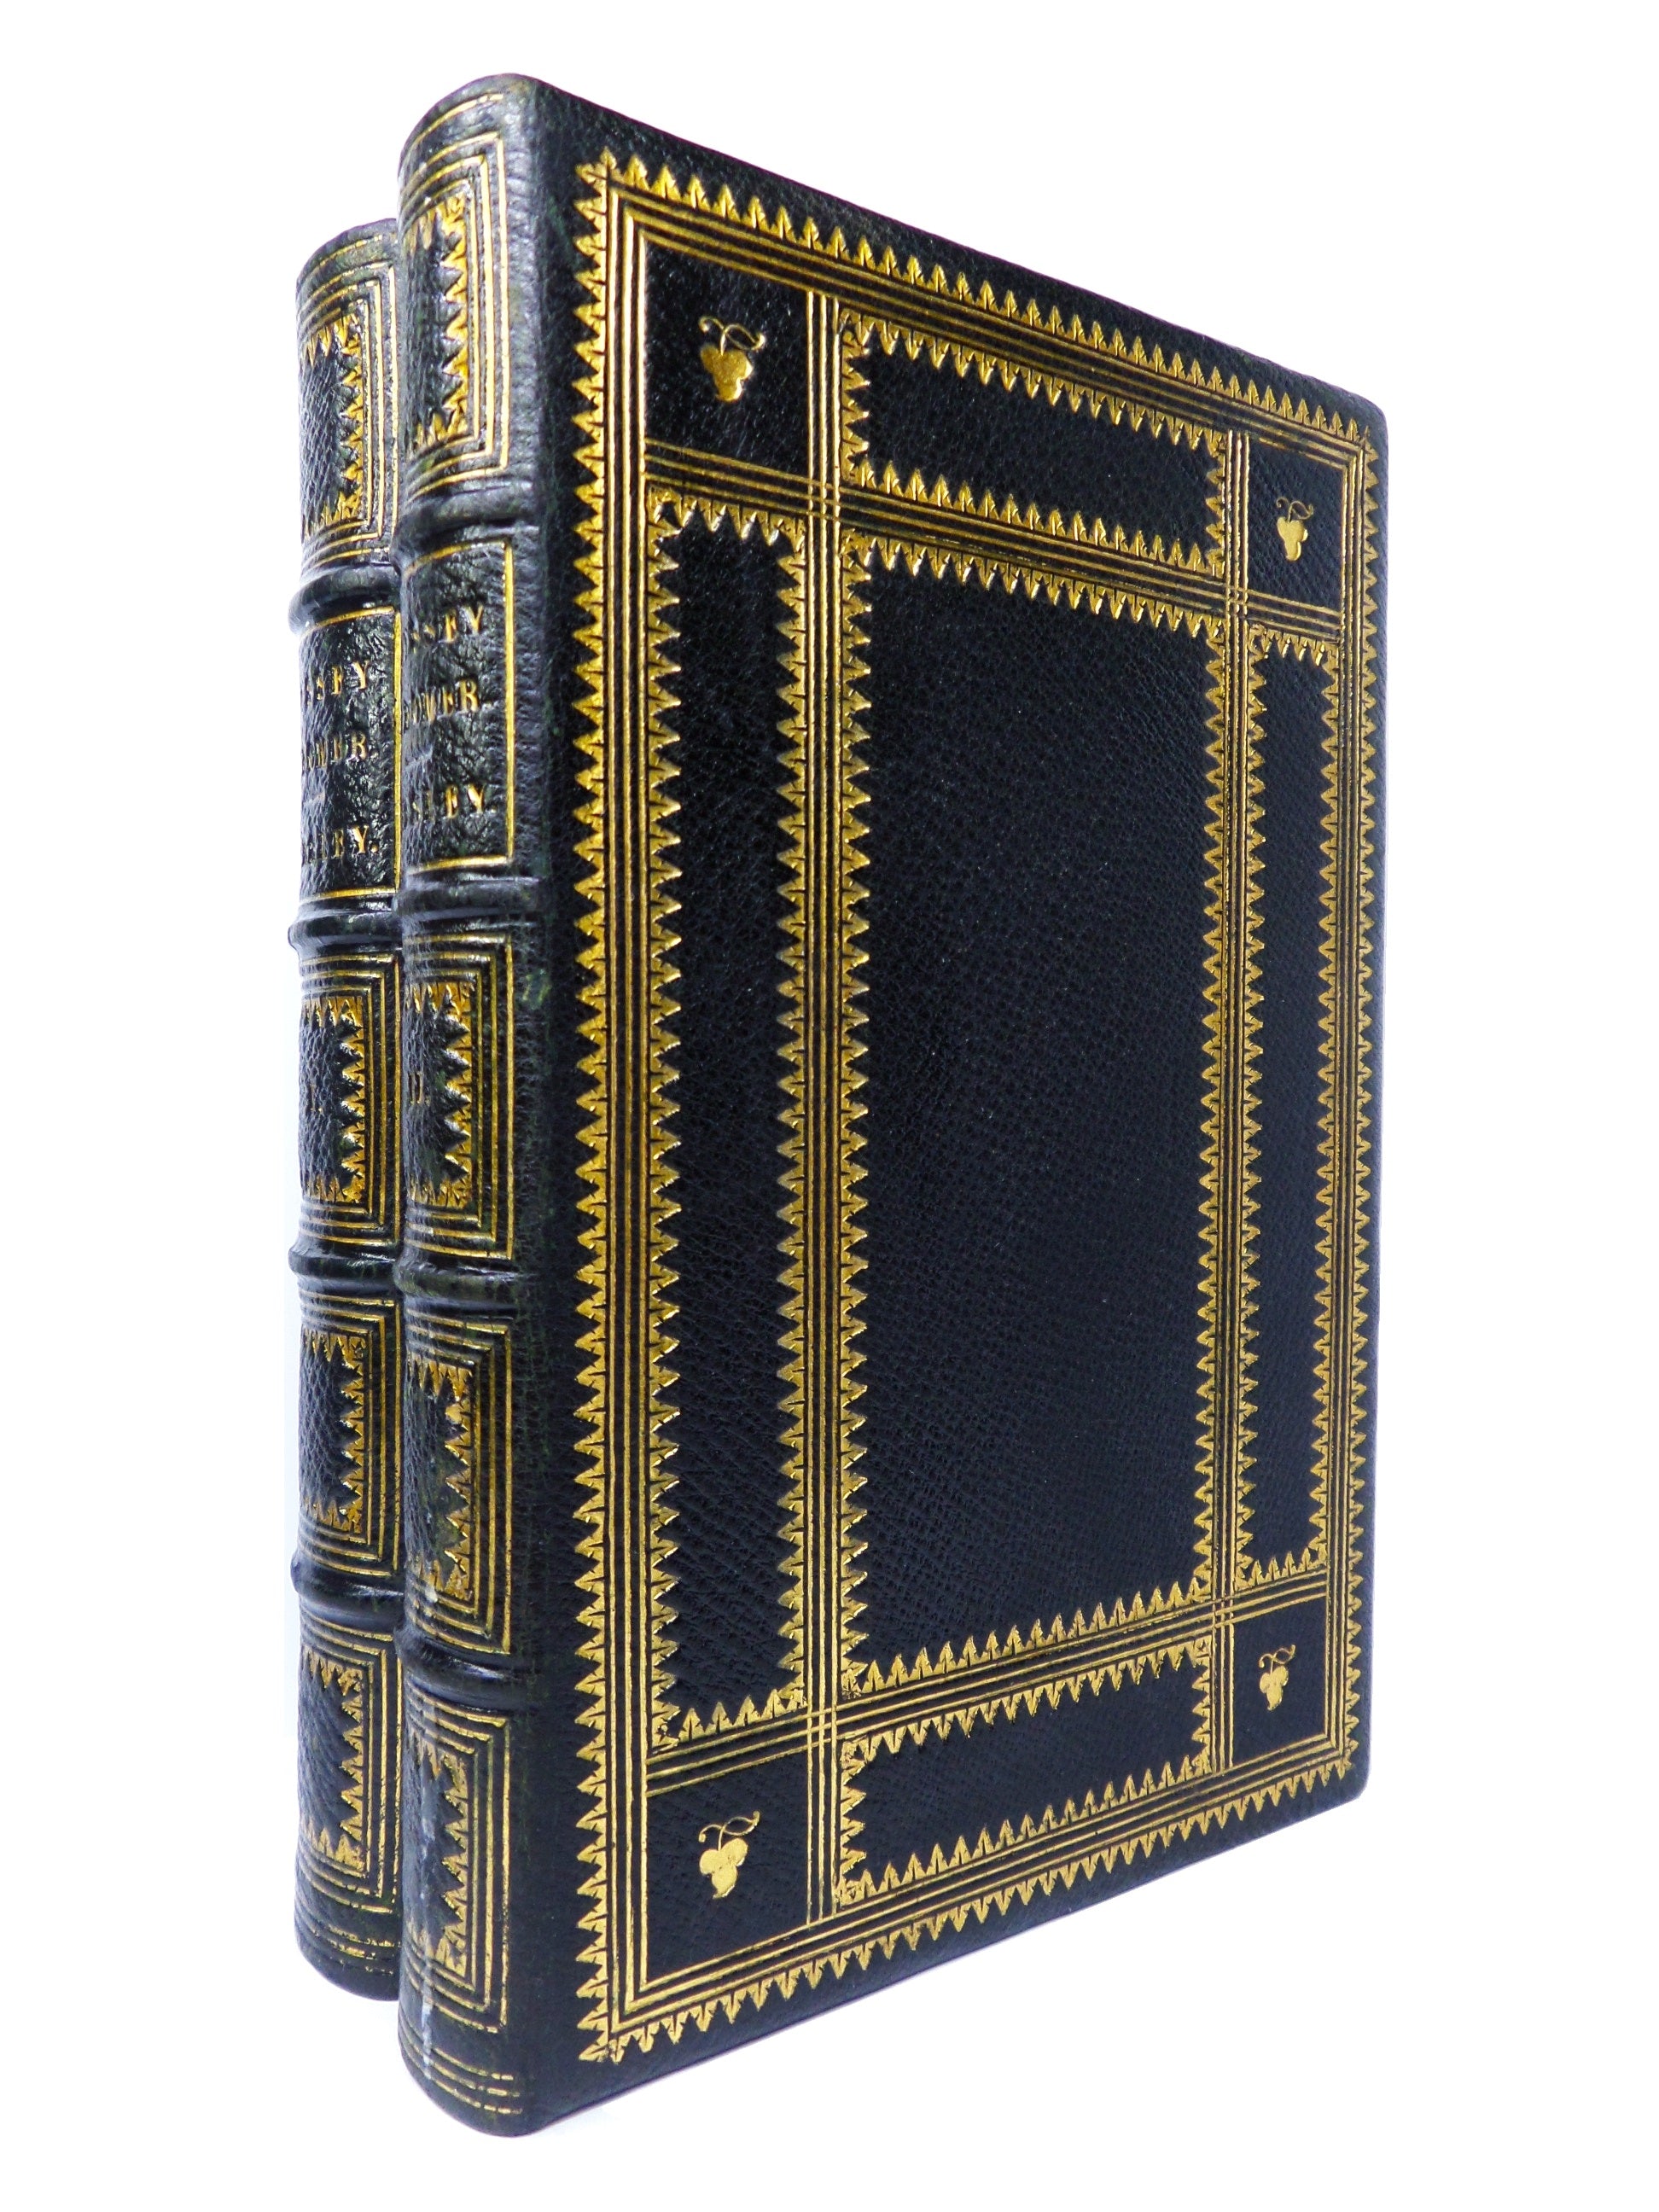 THE ODYSSEY OF HOMER 1861 FINE LEATHER BINDINGS